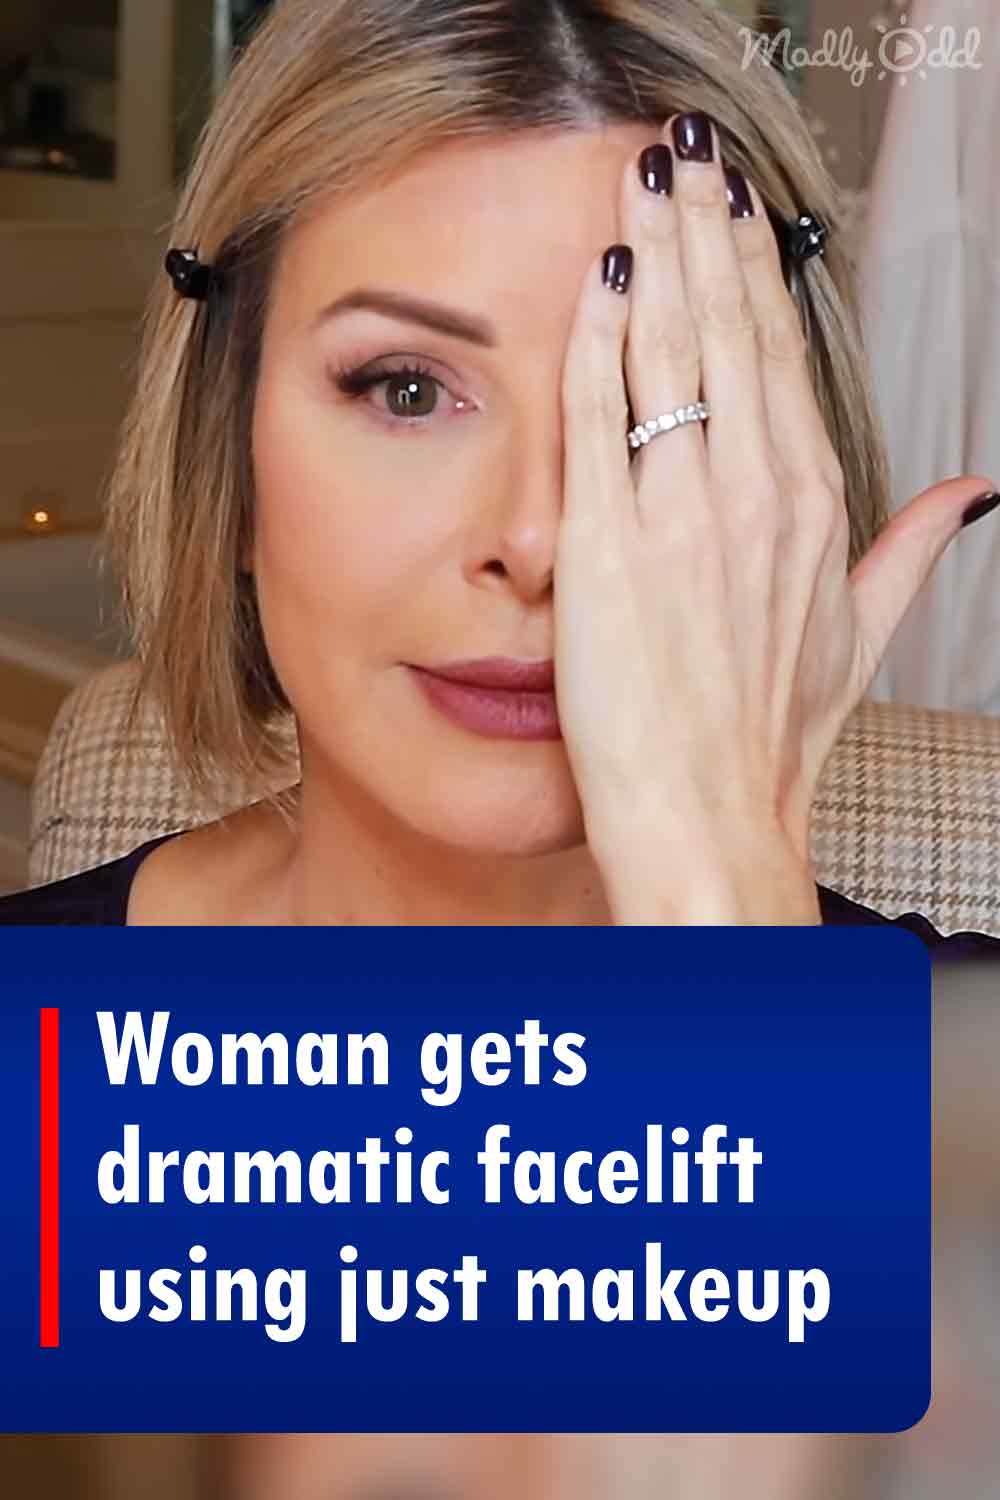 Woman gets dramatic facelift using just makeup